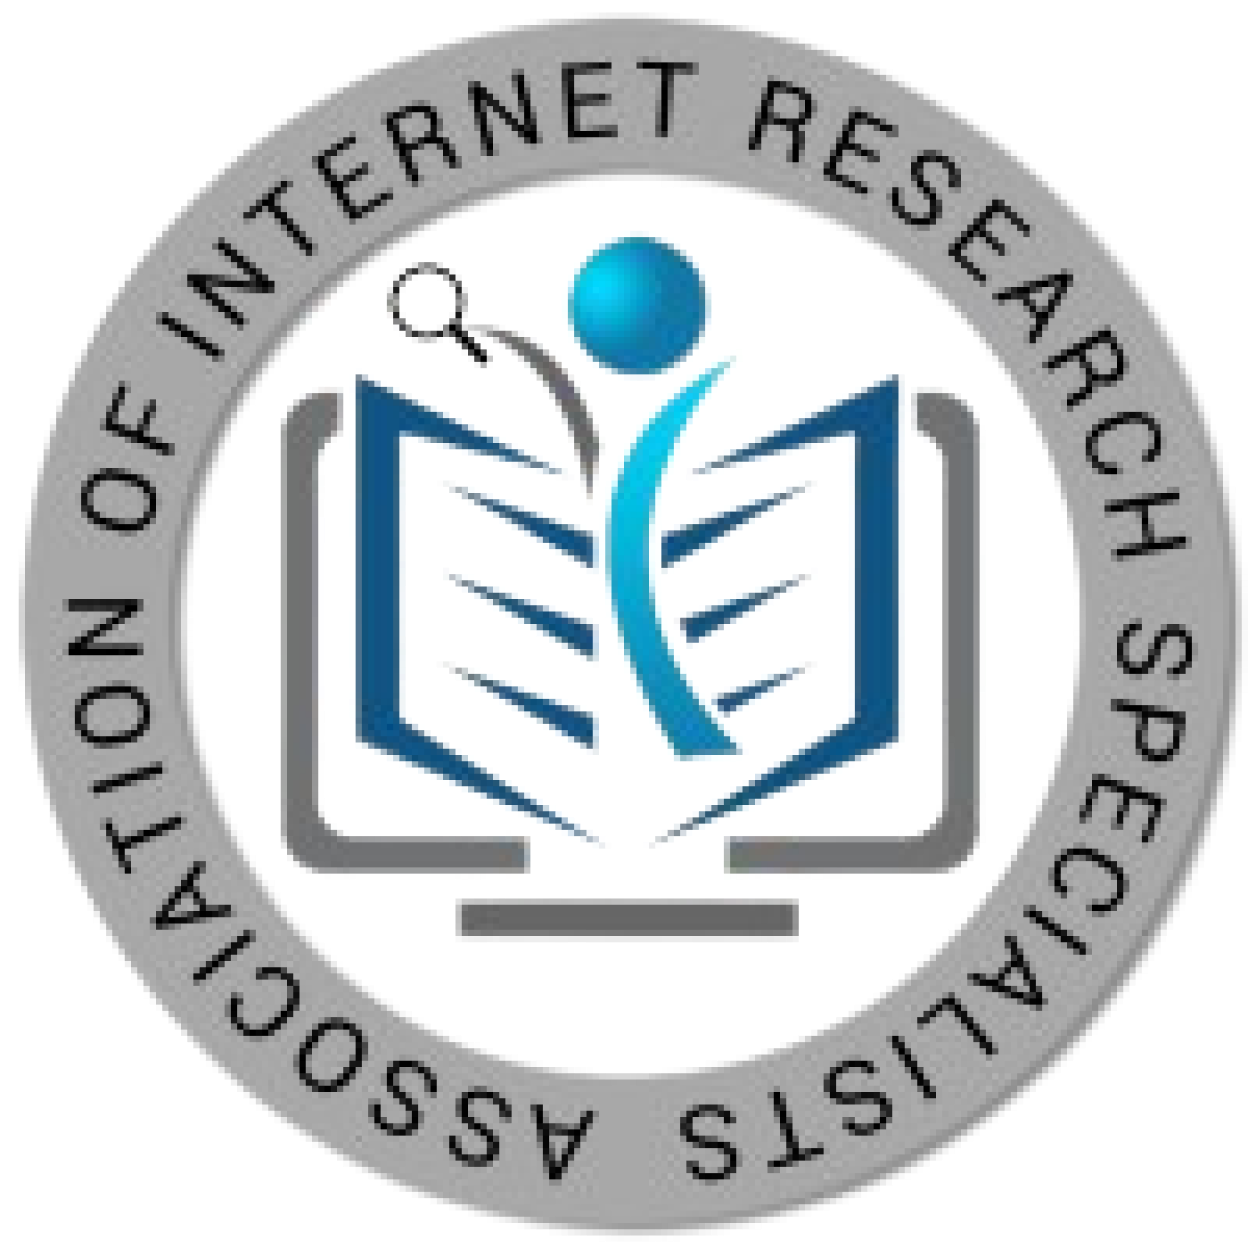 Association of Internet Research Specialists